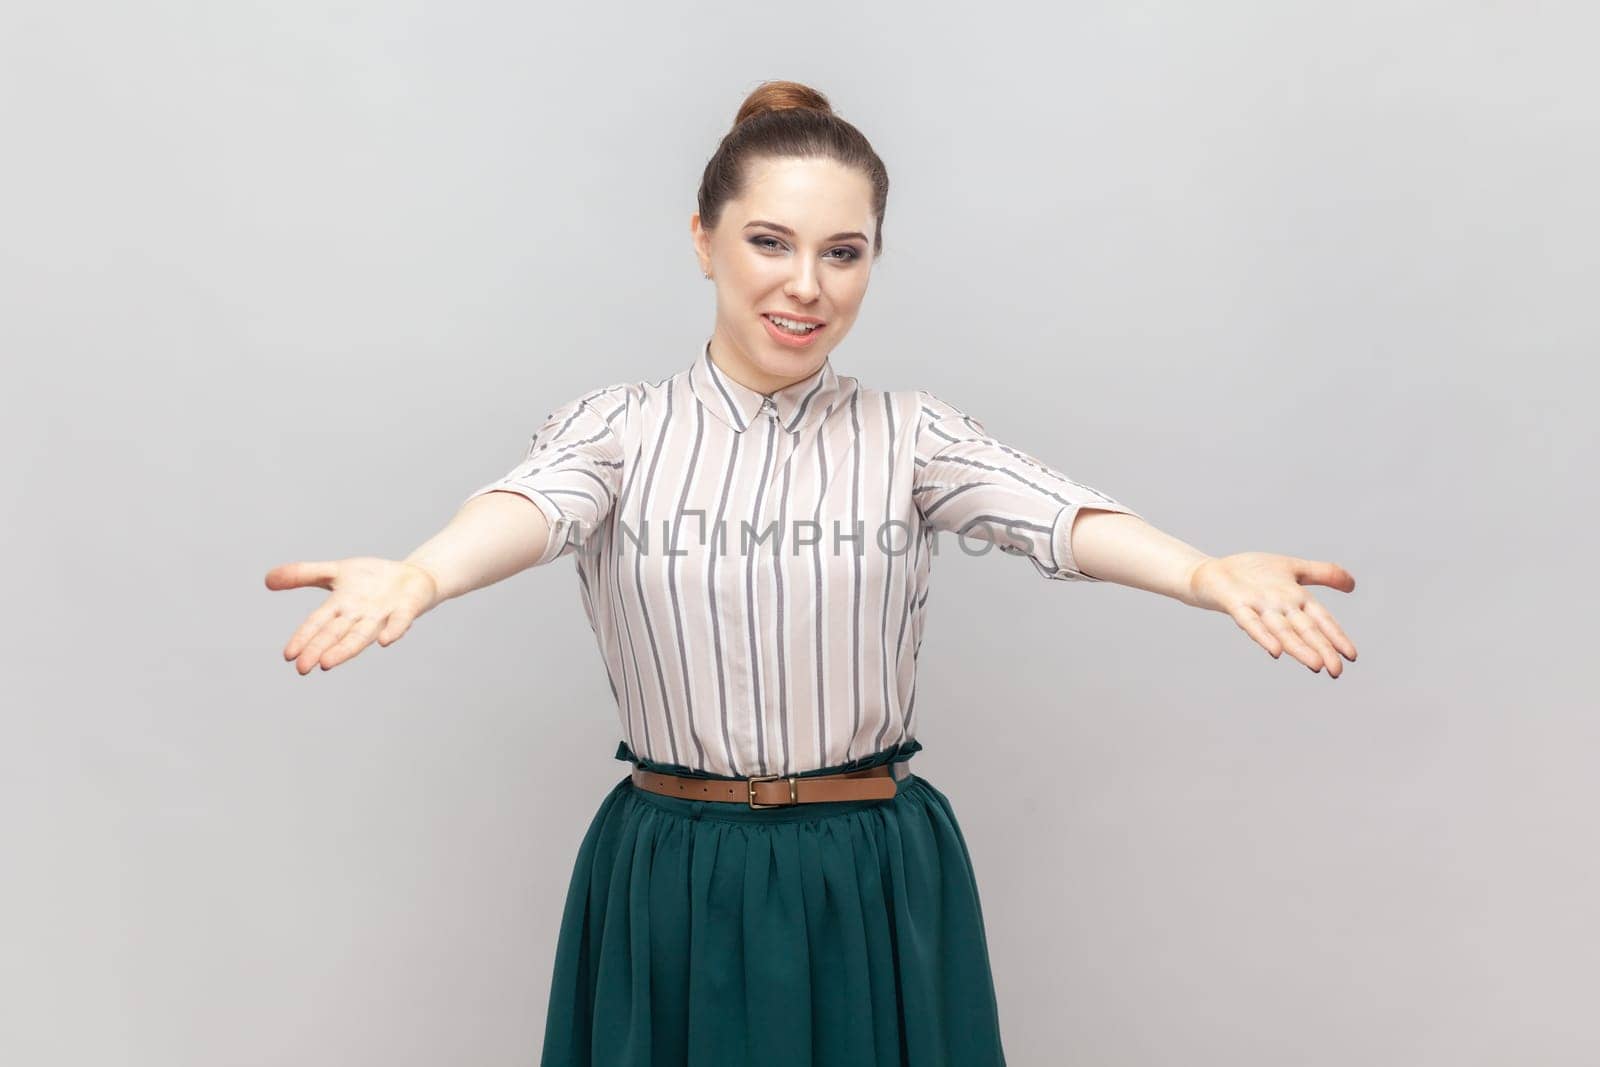 Please, take it for free. Portrait of pleased friendly optimistic woman wearing striped shirt and green skirt standing with spread hands. Indoor studio shot isolated on gray background.